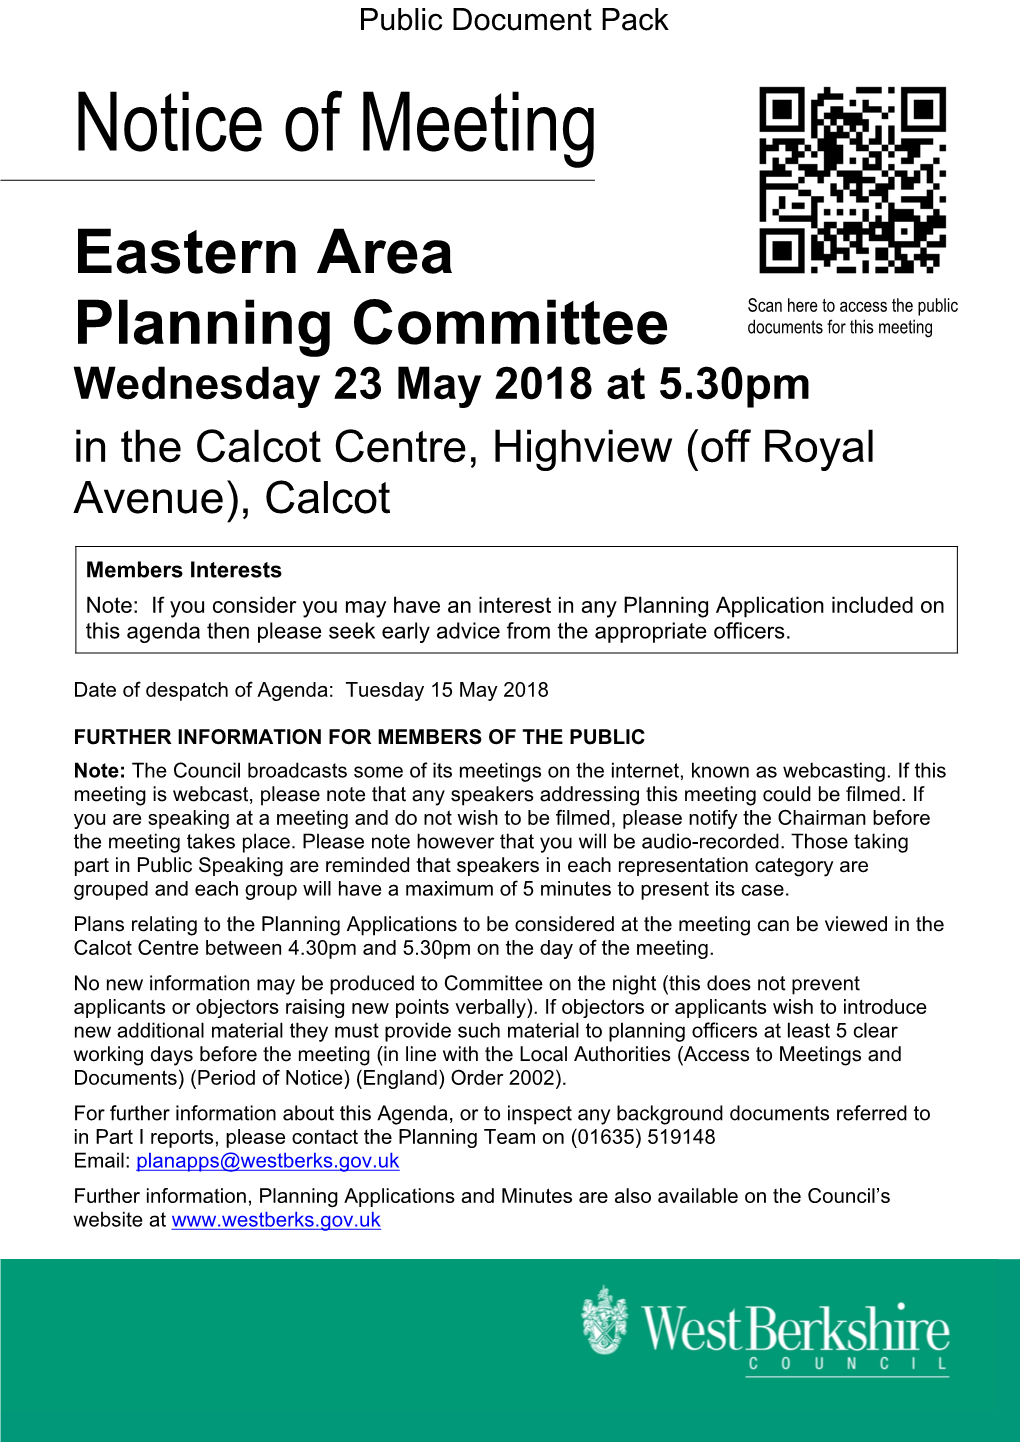 (Public Pack)Agenda Document for Eastern Area Planning Committee